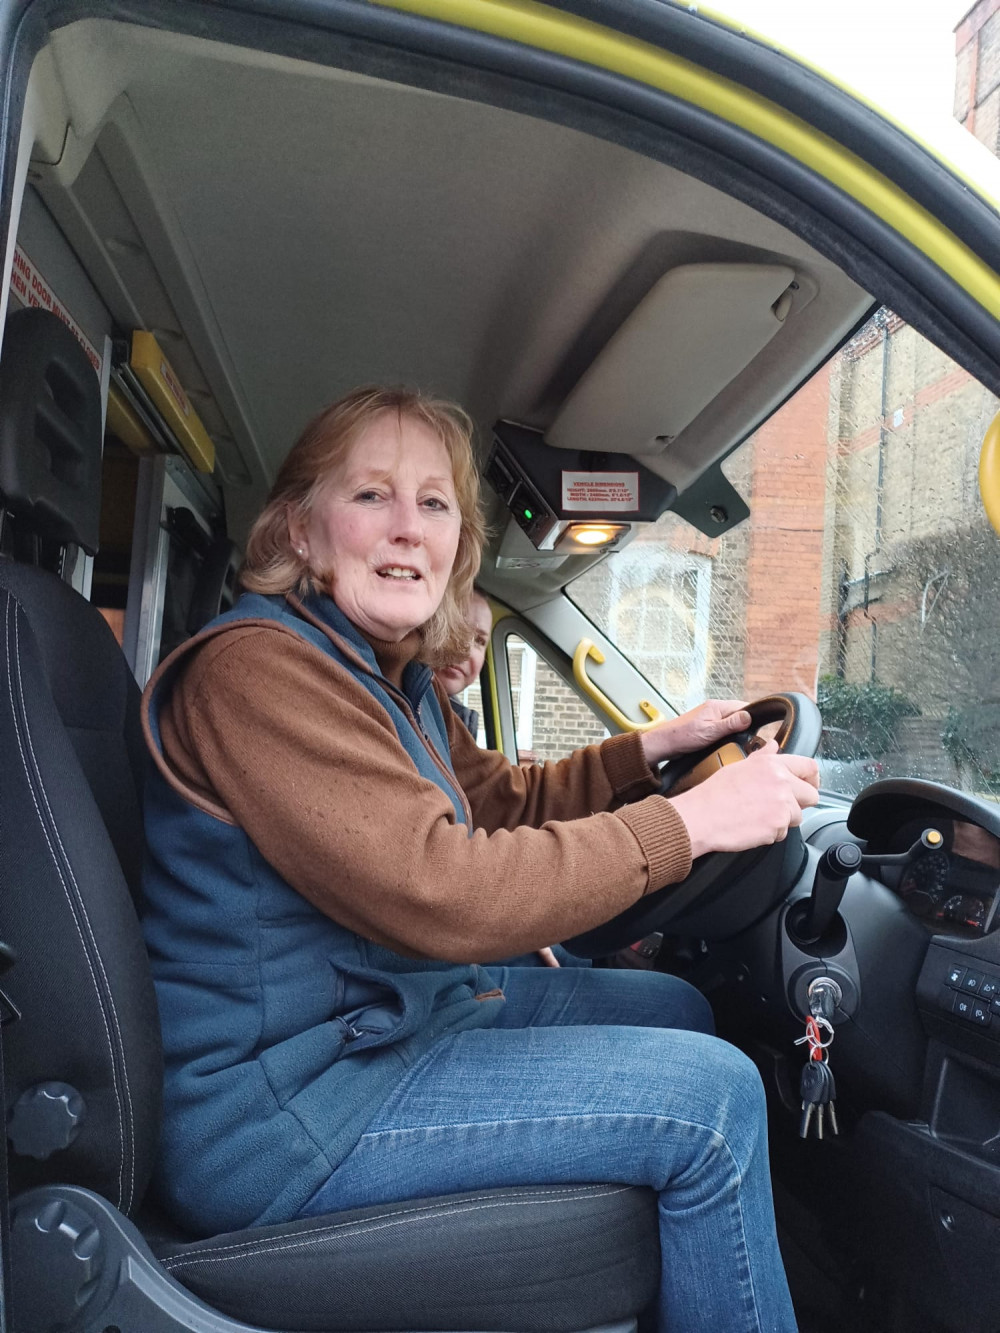 Harriet Sandys at the wheel of an ambulance